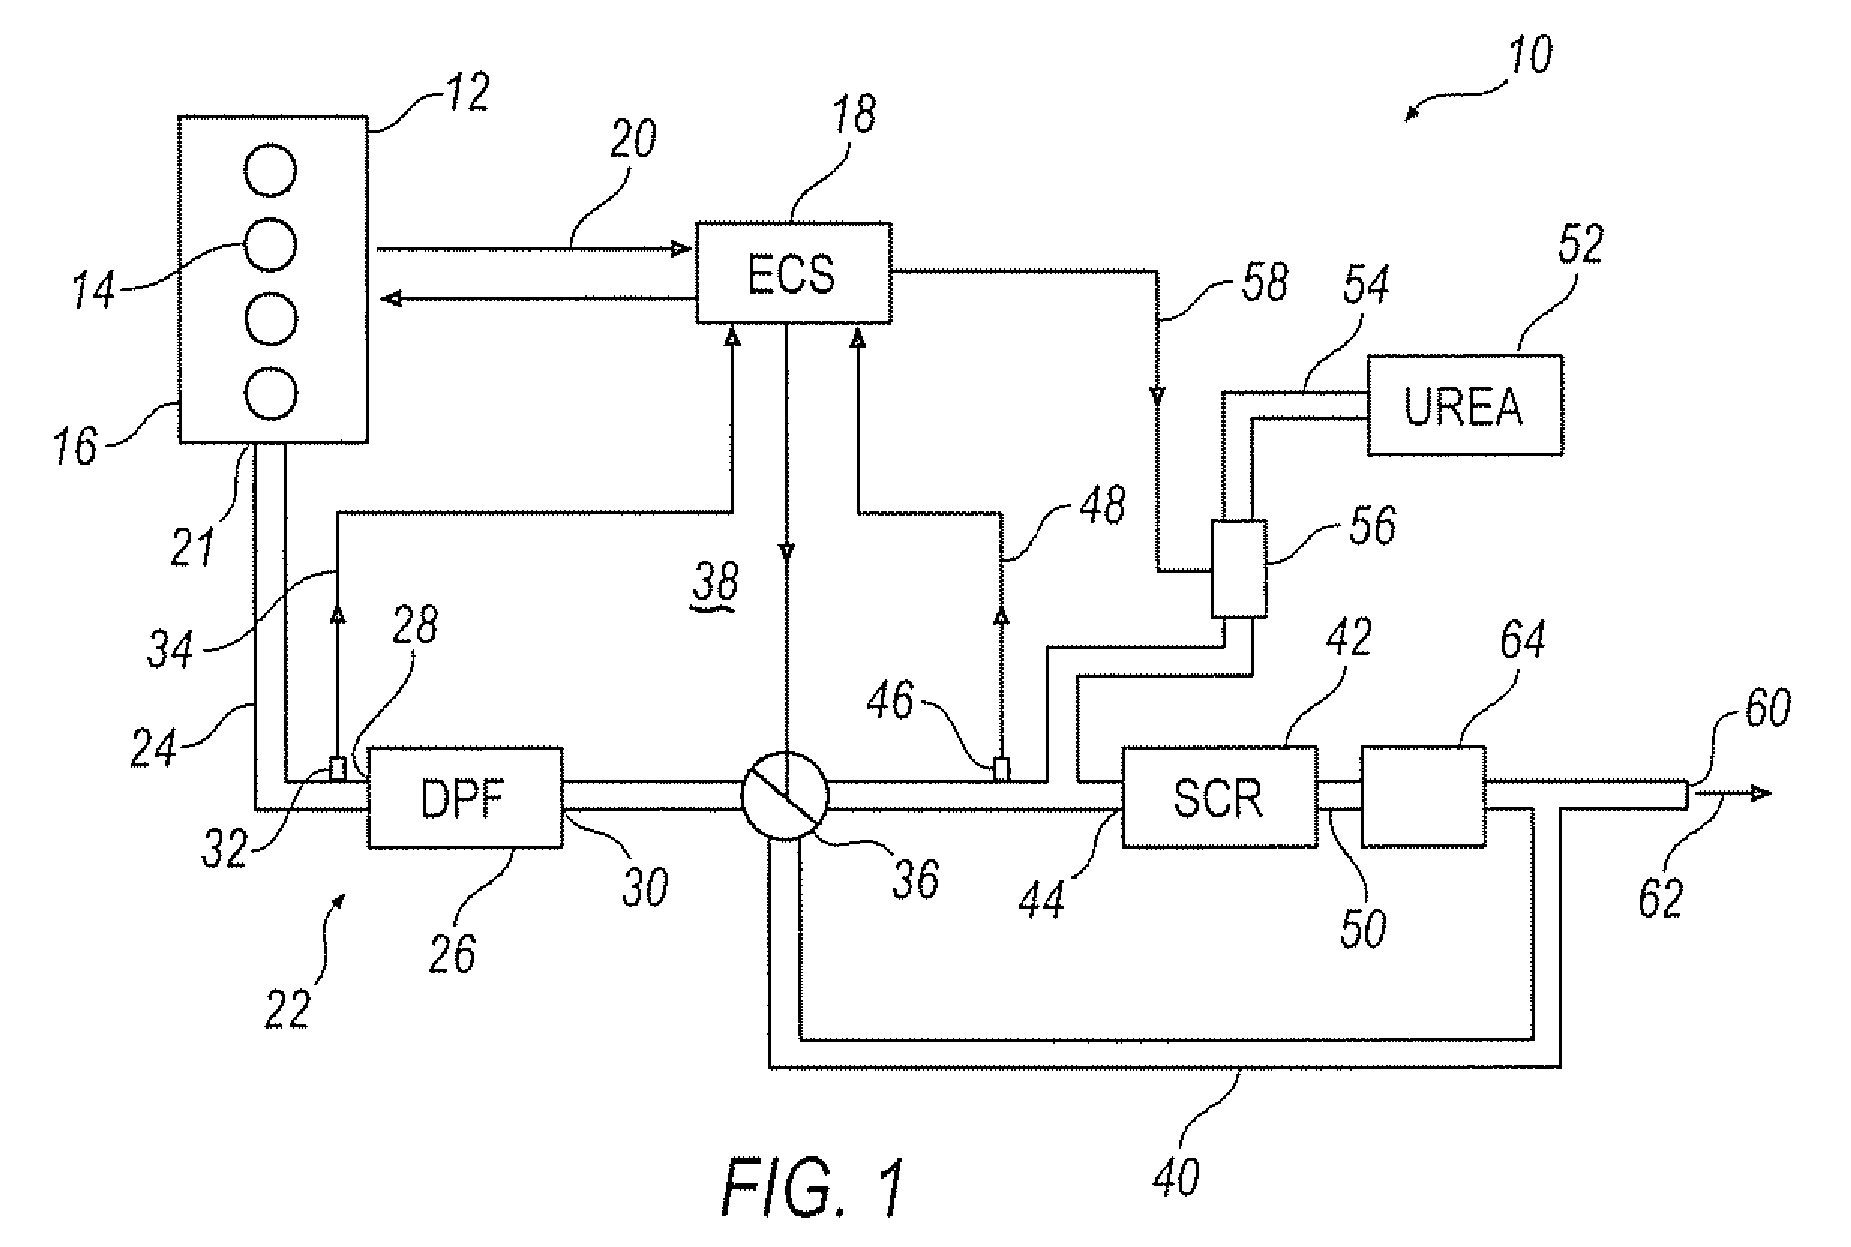 Methods to protect selective catalyst reducer aftertreatment devices during uncontrolled diesel particulate filter regeneration